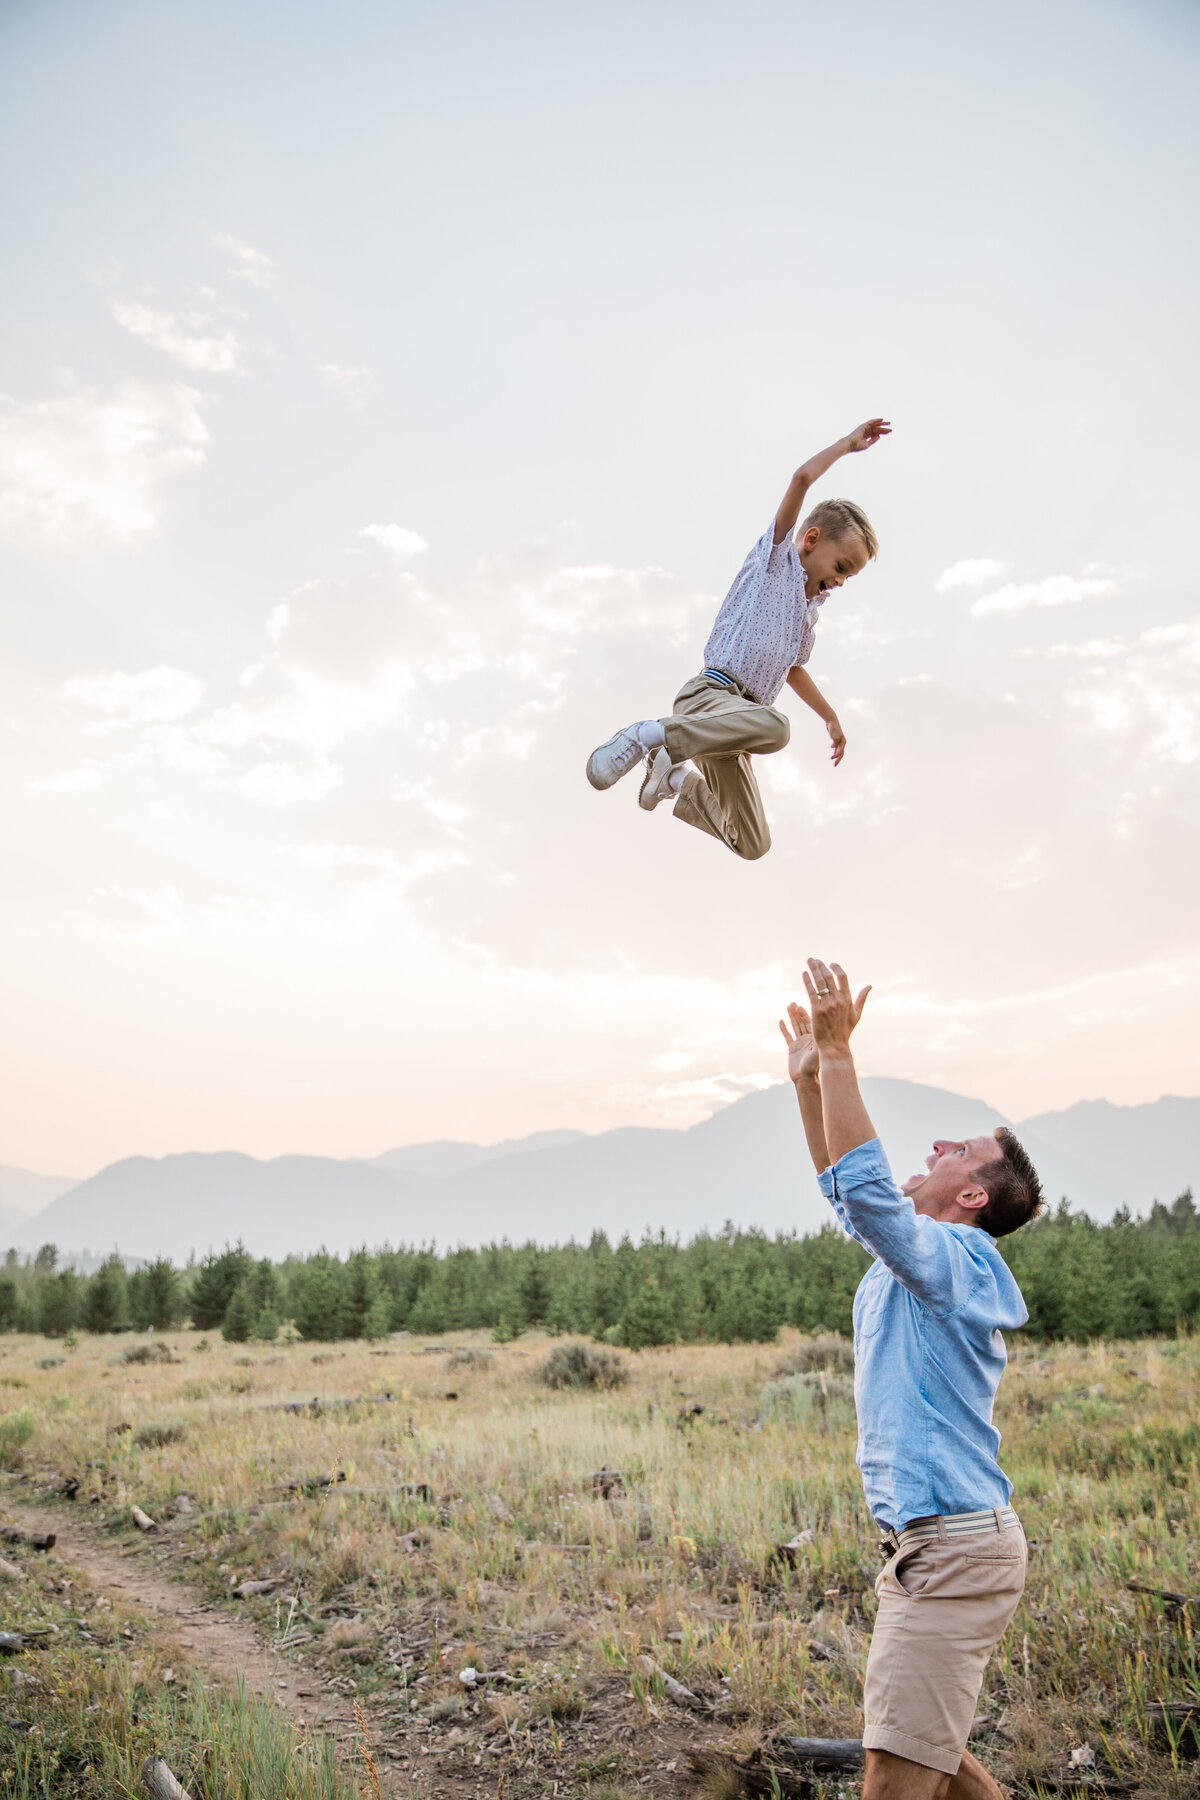 A dad throws his young son playfully in the air. They are smiling with mountains behind them